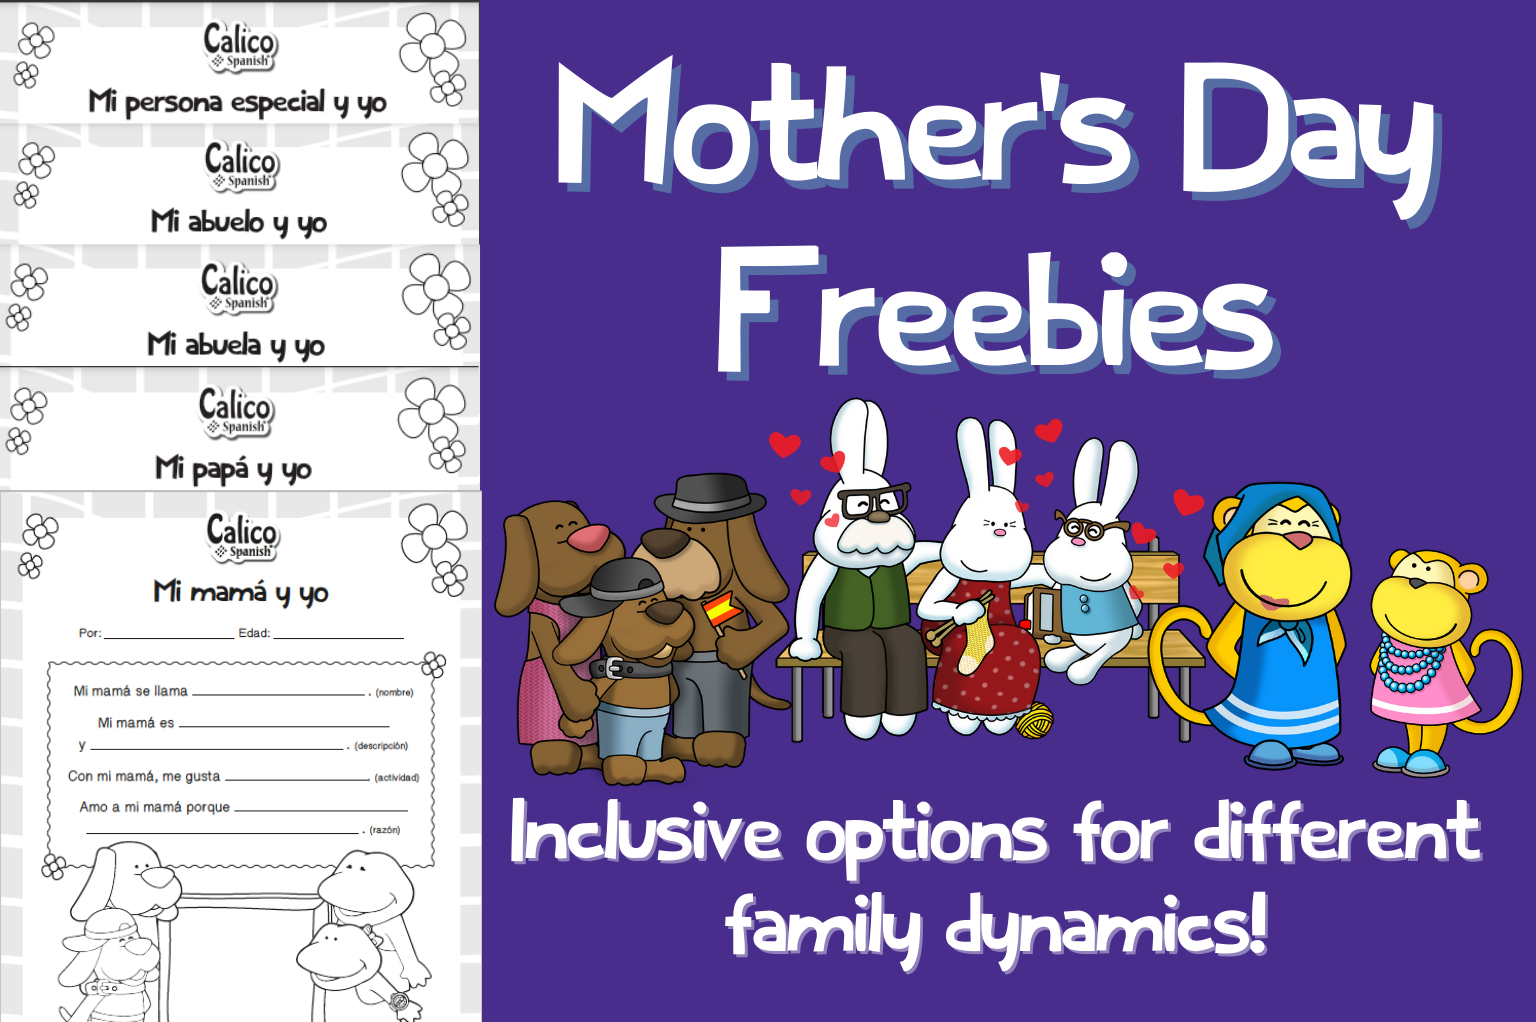 Mother's day freebies